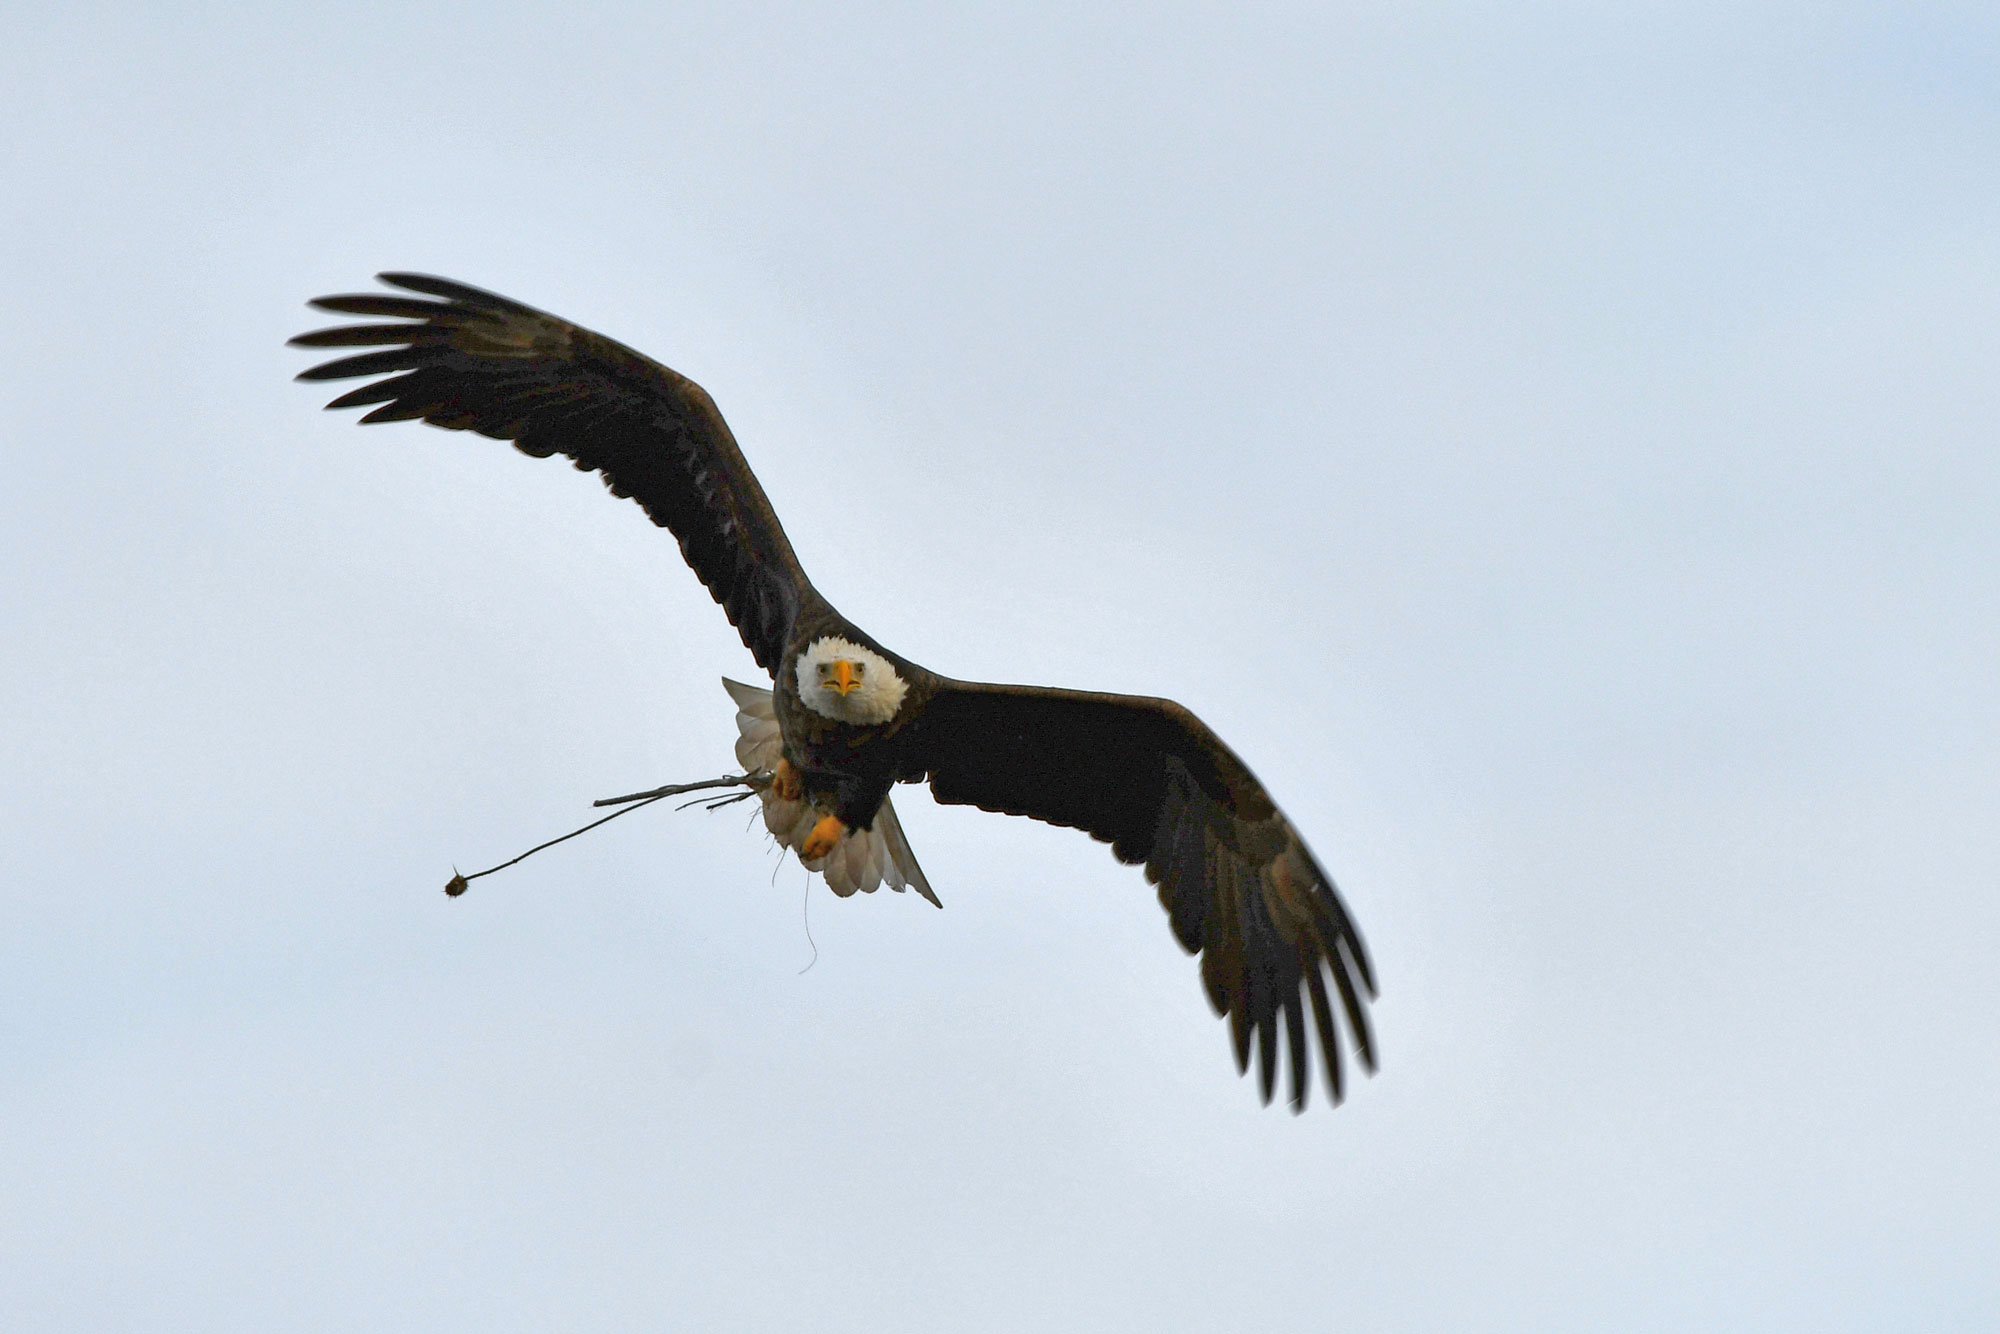 A bald eagle flies overhead with nesting material.